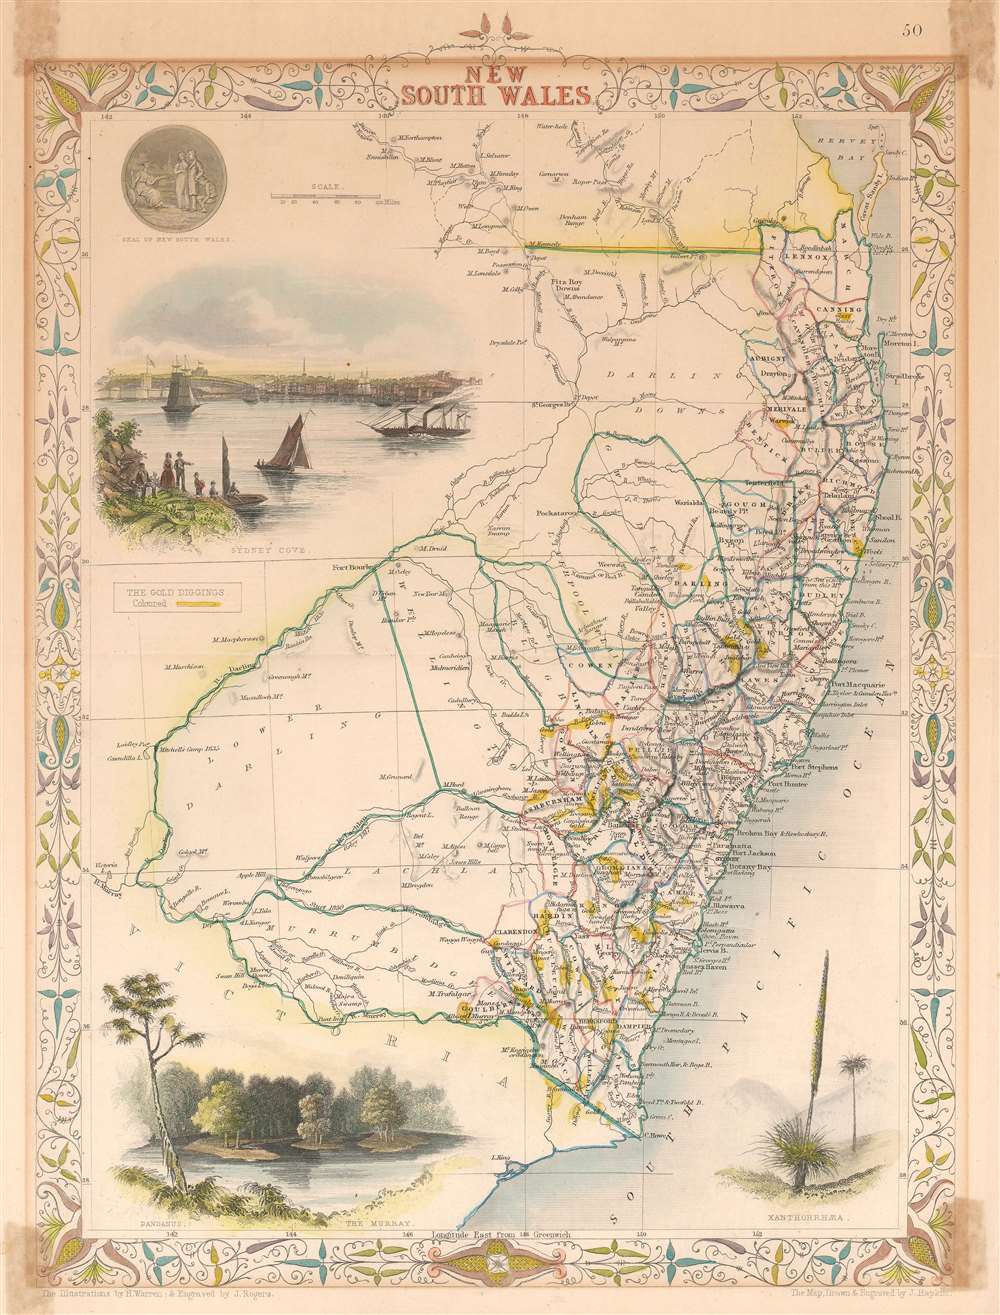 1851 Tallis and Rapkin Map of New South Wales, Australia w/ Gold Claims